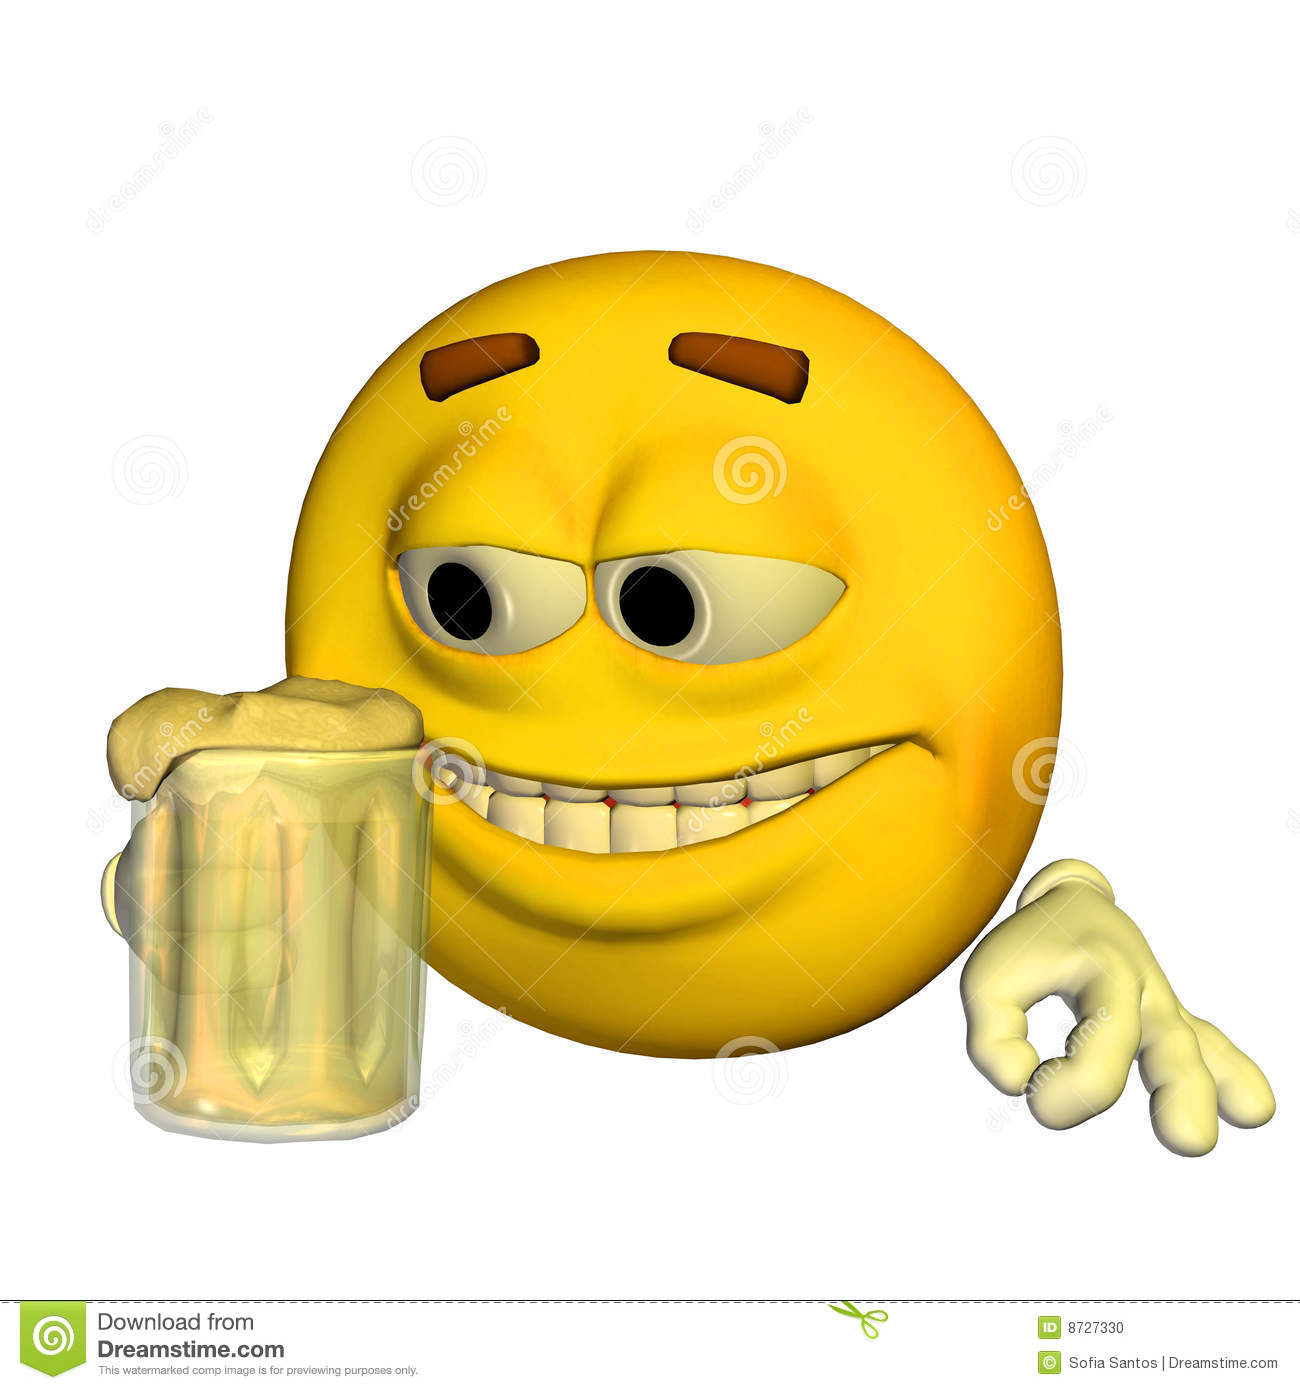 7 Smiley Emoticon Drinking Beer Images Smiley Face With Beer Smiley Face Drinking Beer And Smiley Face With Beer Newdesignfile Com